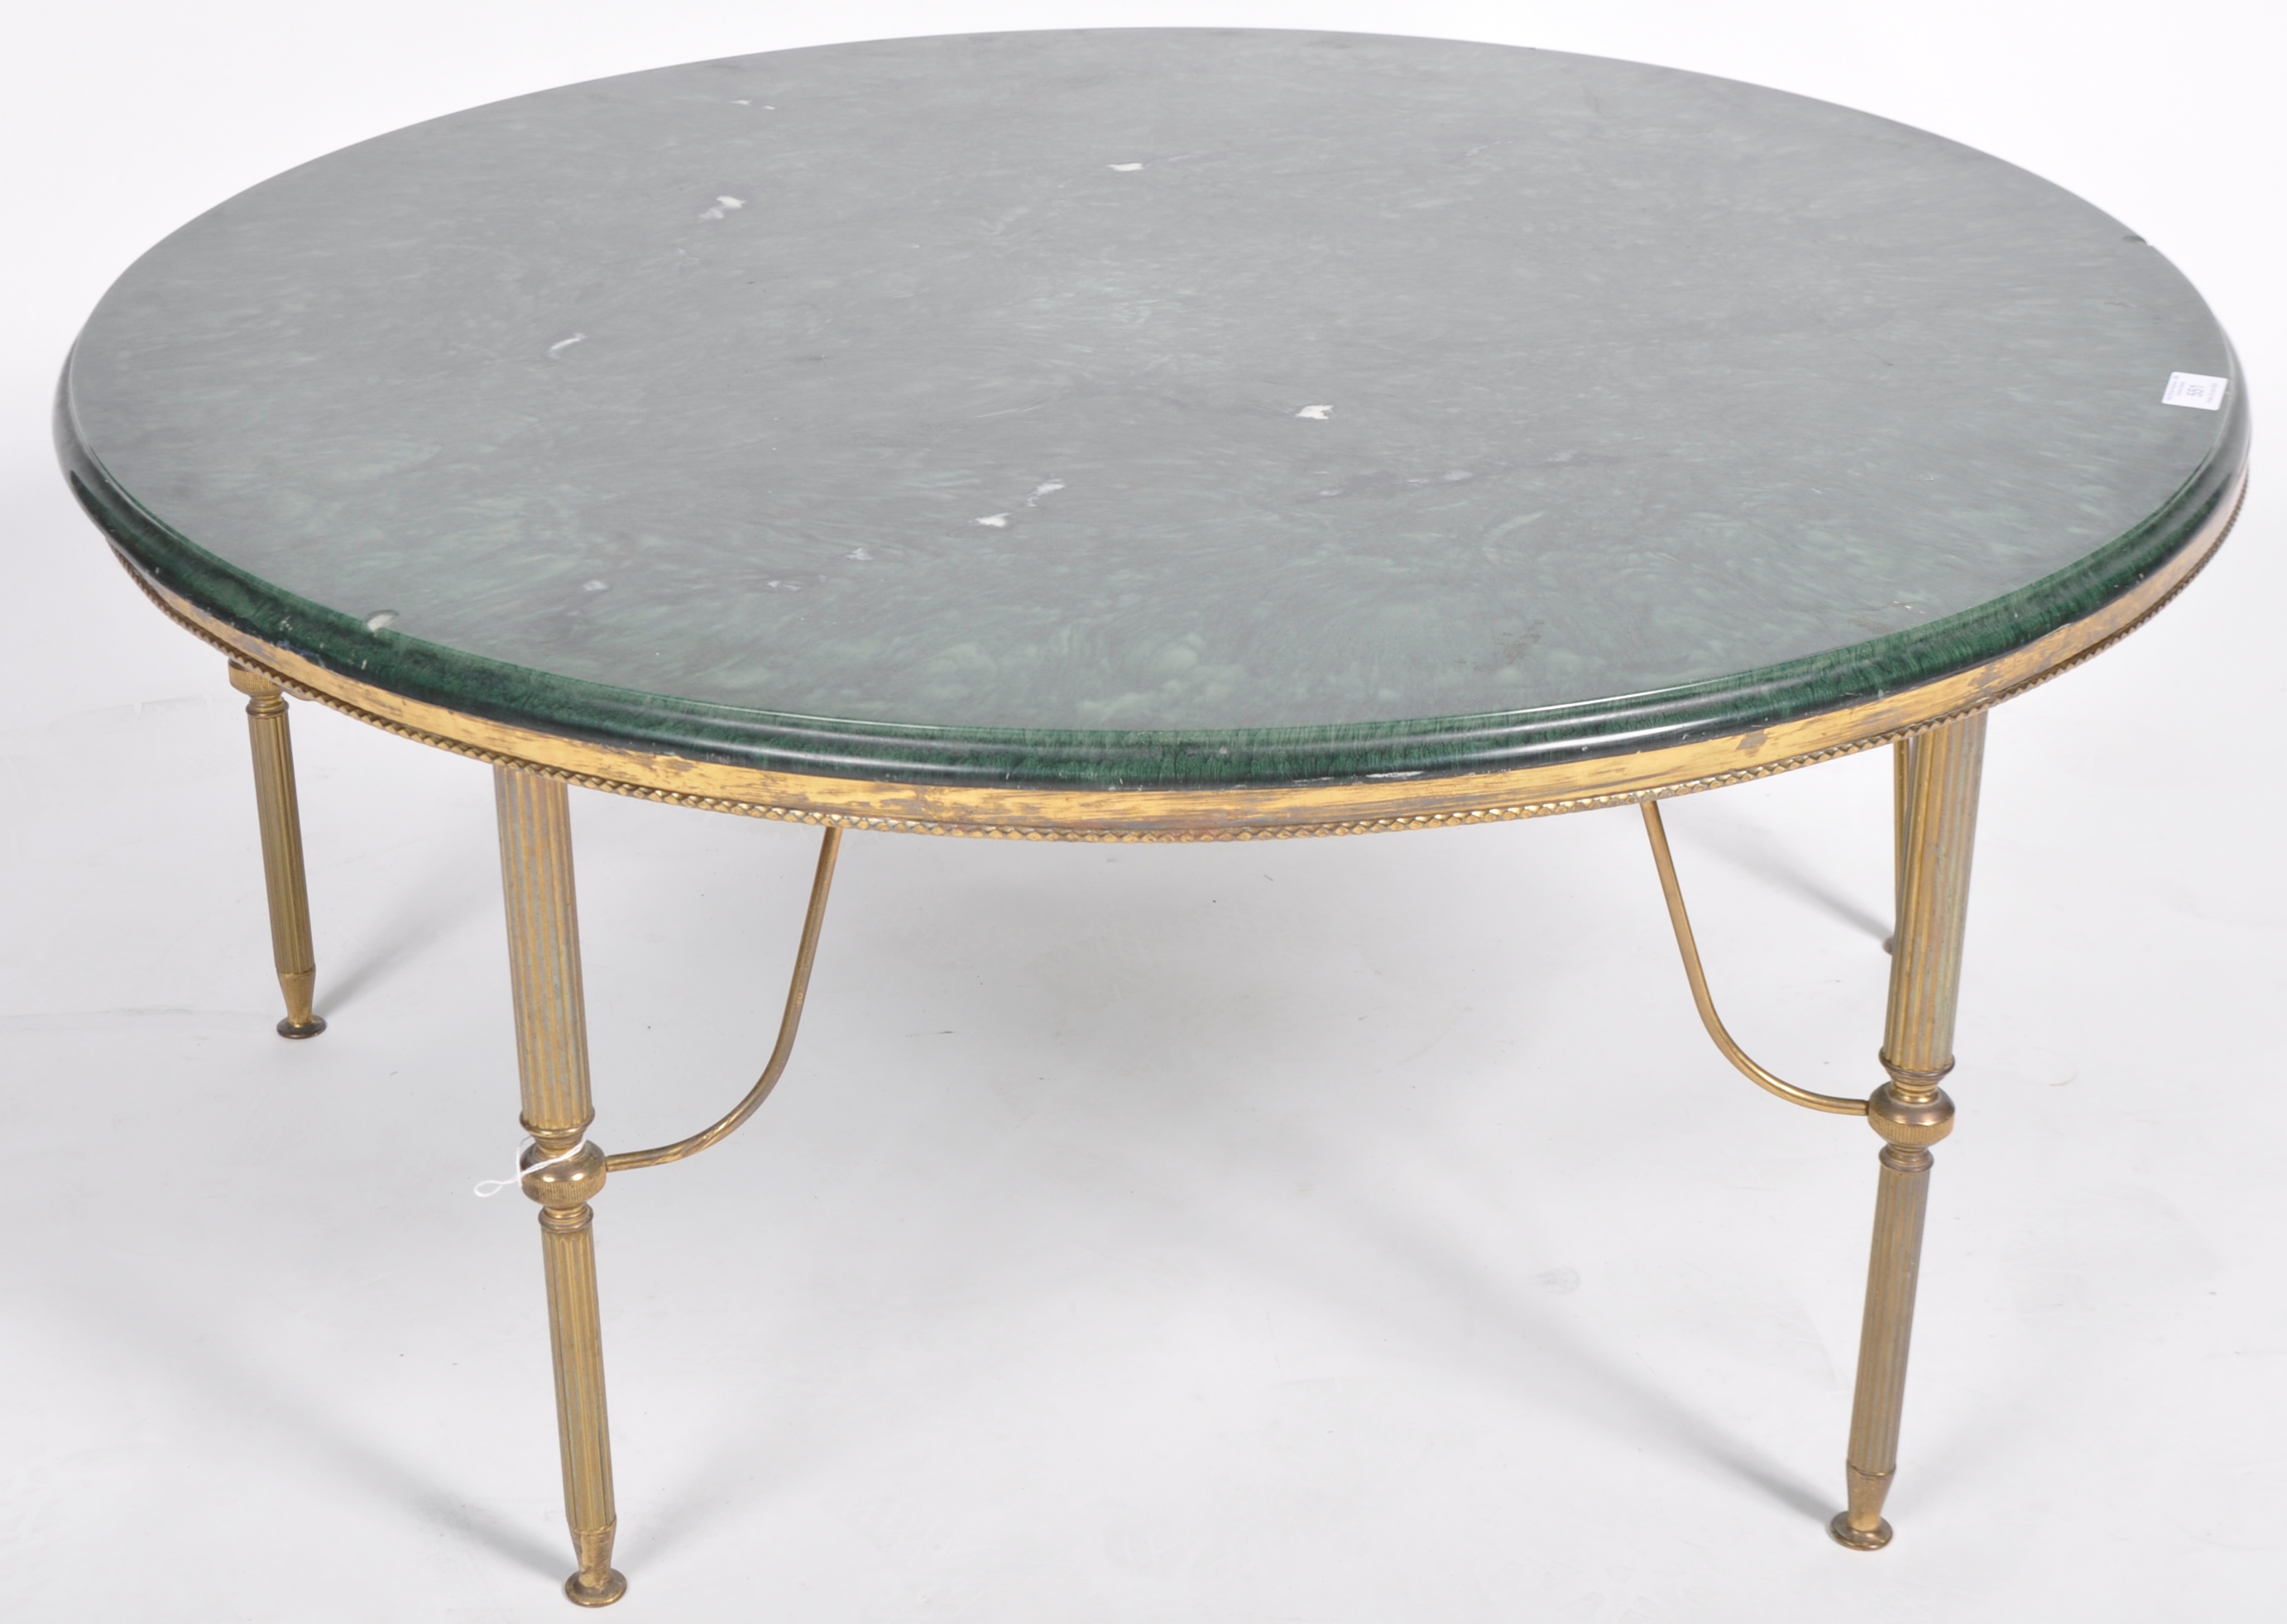 20TH CENTURY HOLLYWOOD REGENCY BRASS COFFEE TABLE - Image 2 of 6